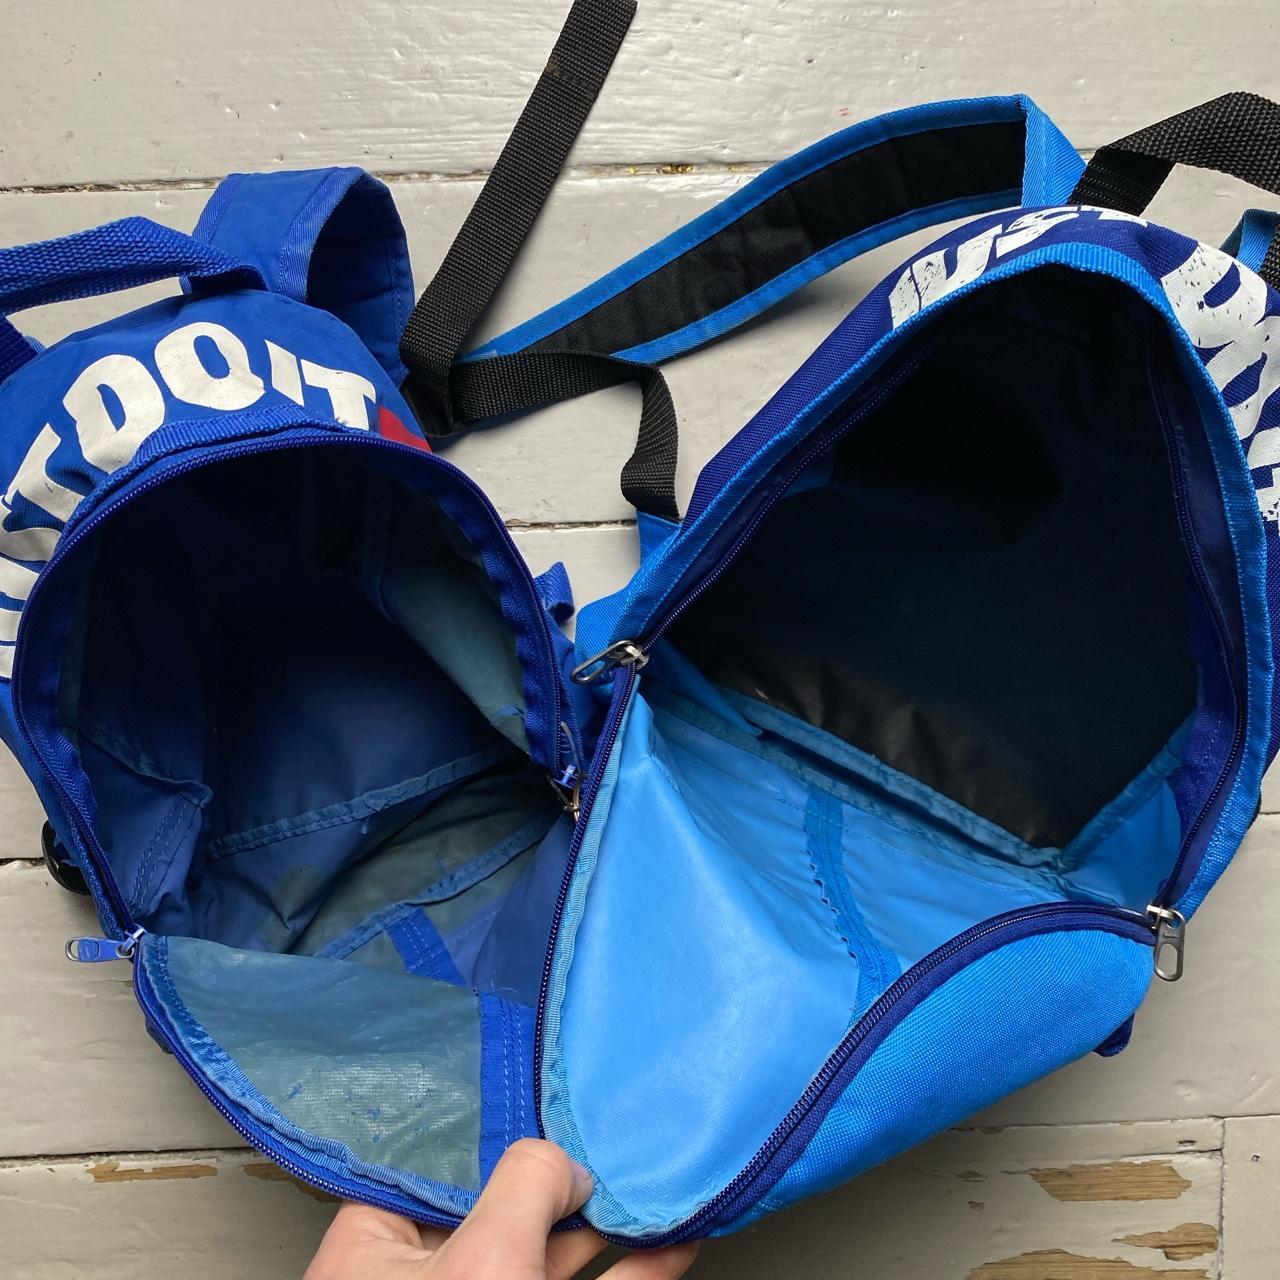 Nike Just Do It Bags Blue and White